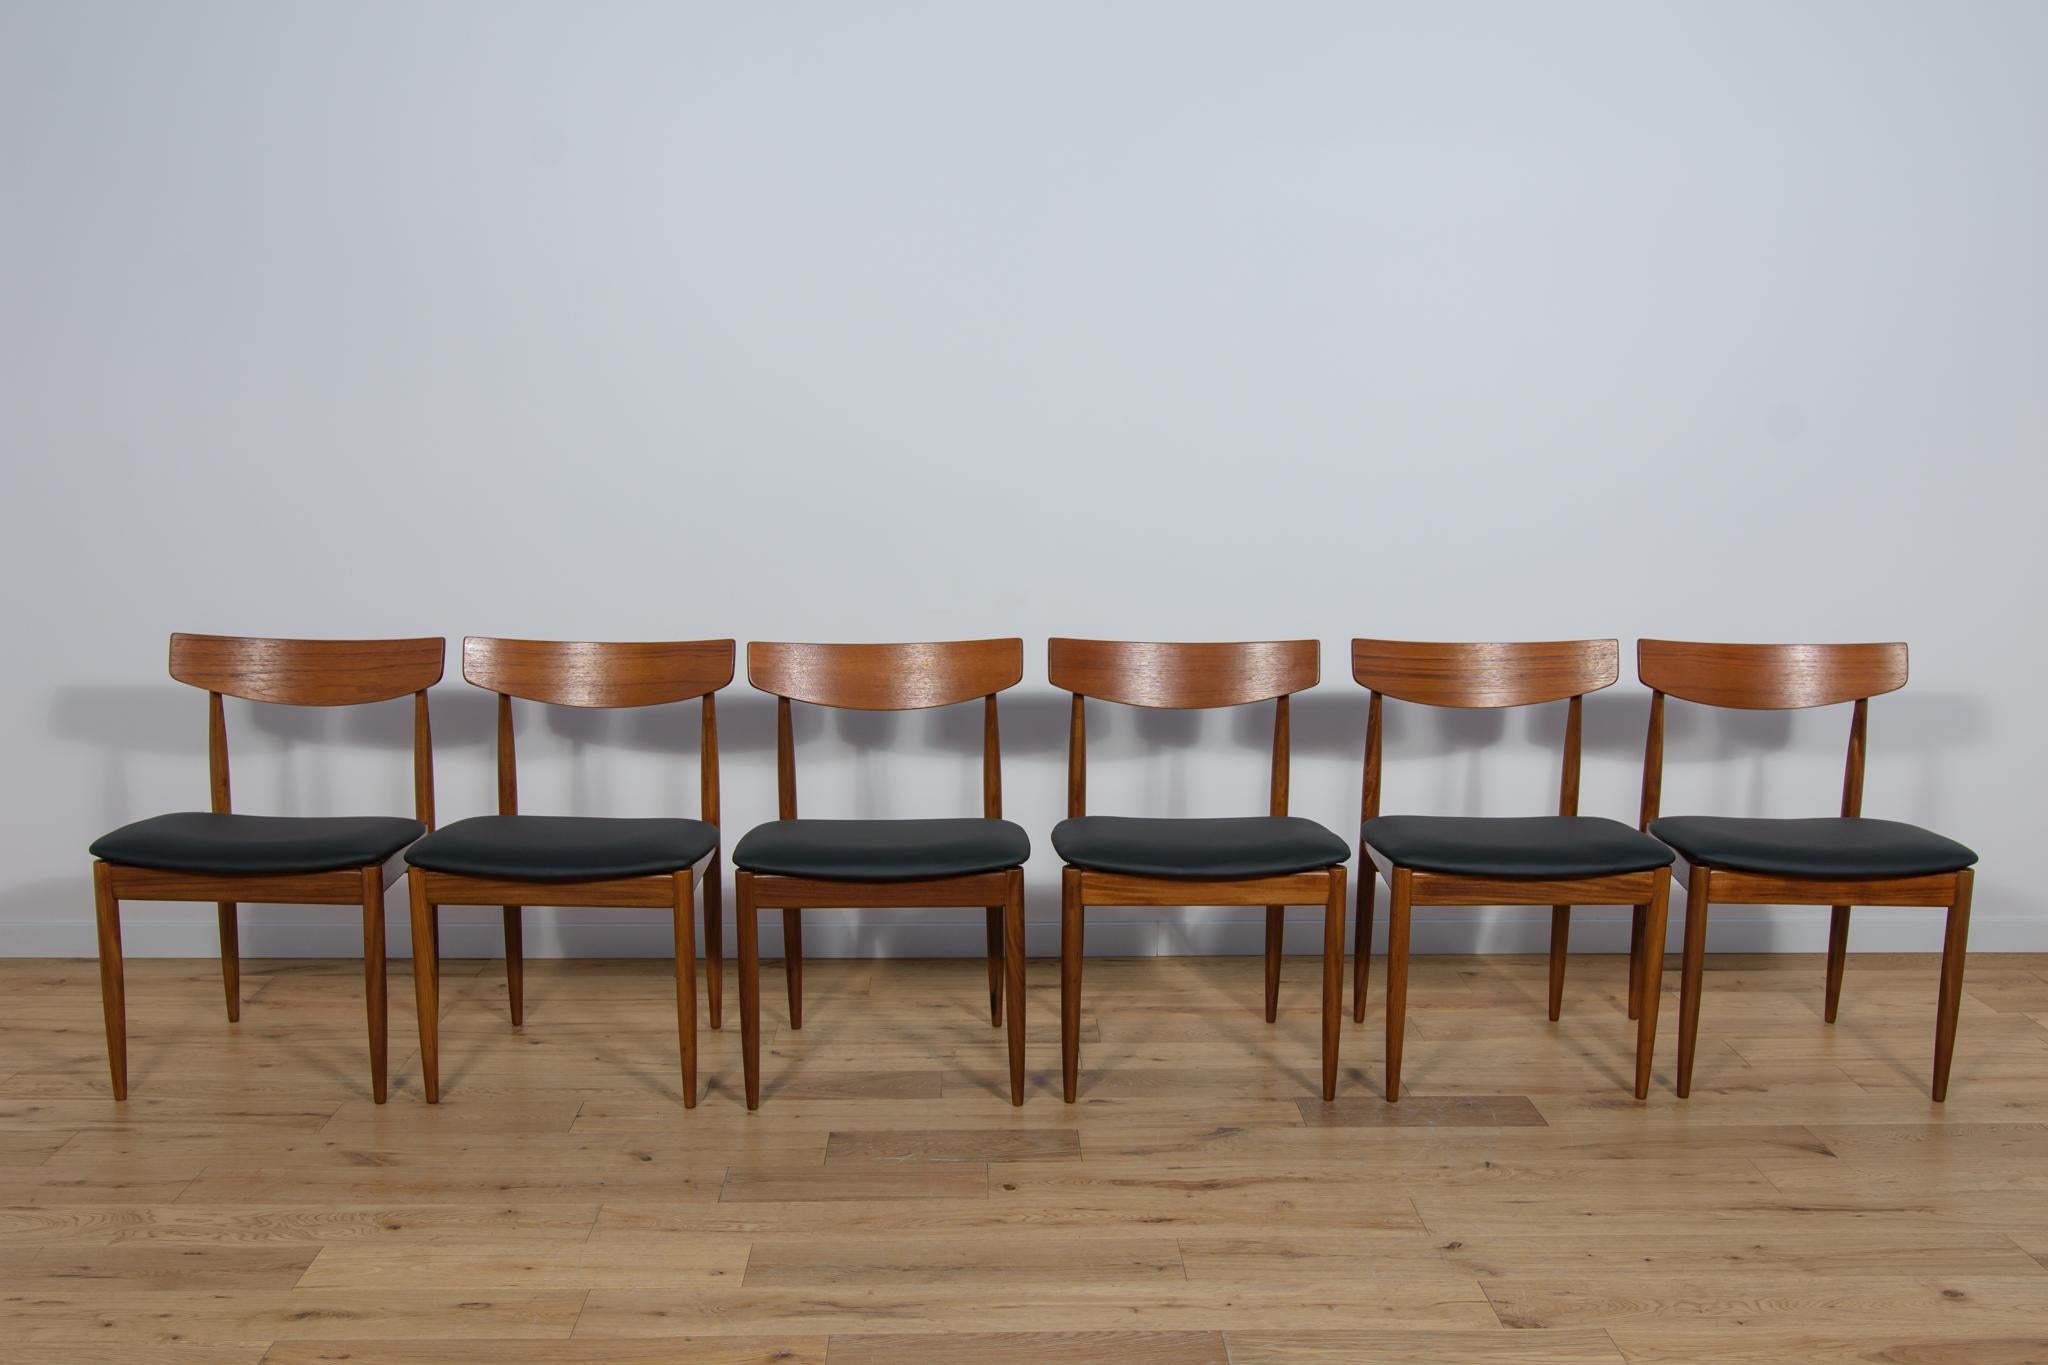 This set of six dining chairs was produced by G-Plan in the United Kingdom circa 1960. It was designed by I. Kofod- Larsen. The chairs are made of teak, have ergonomically shaped backrests. The frames are made of teak and the seats have been